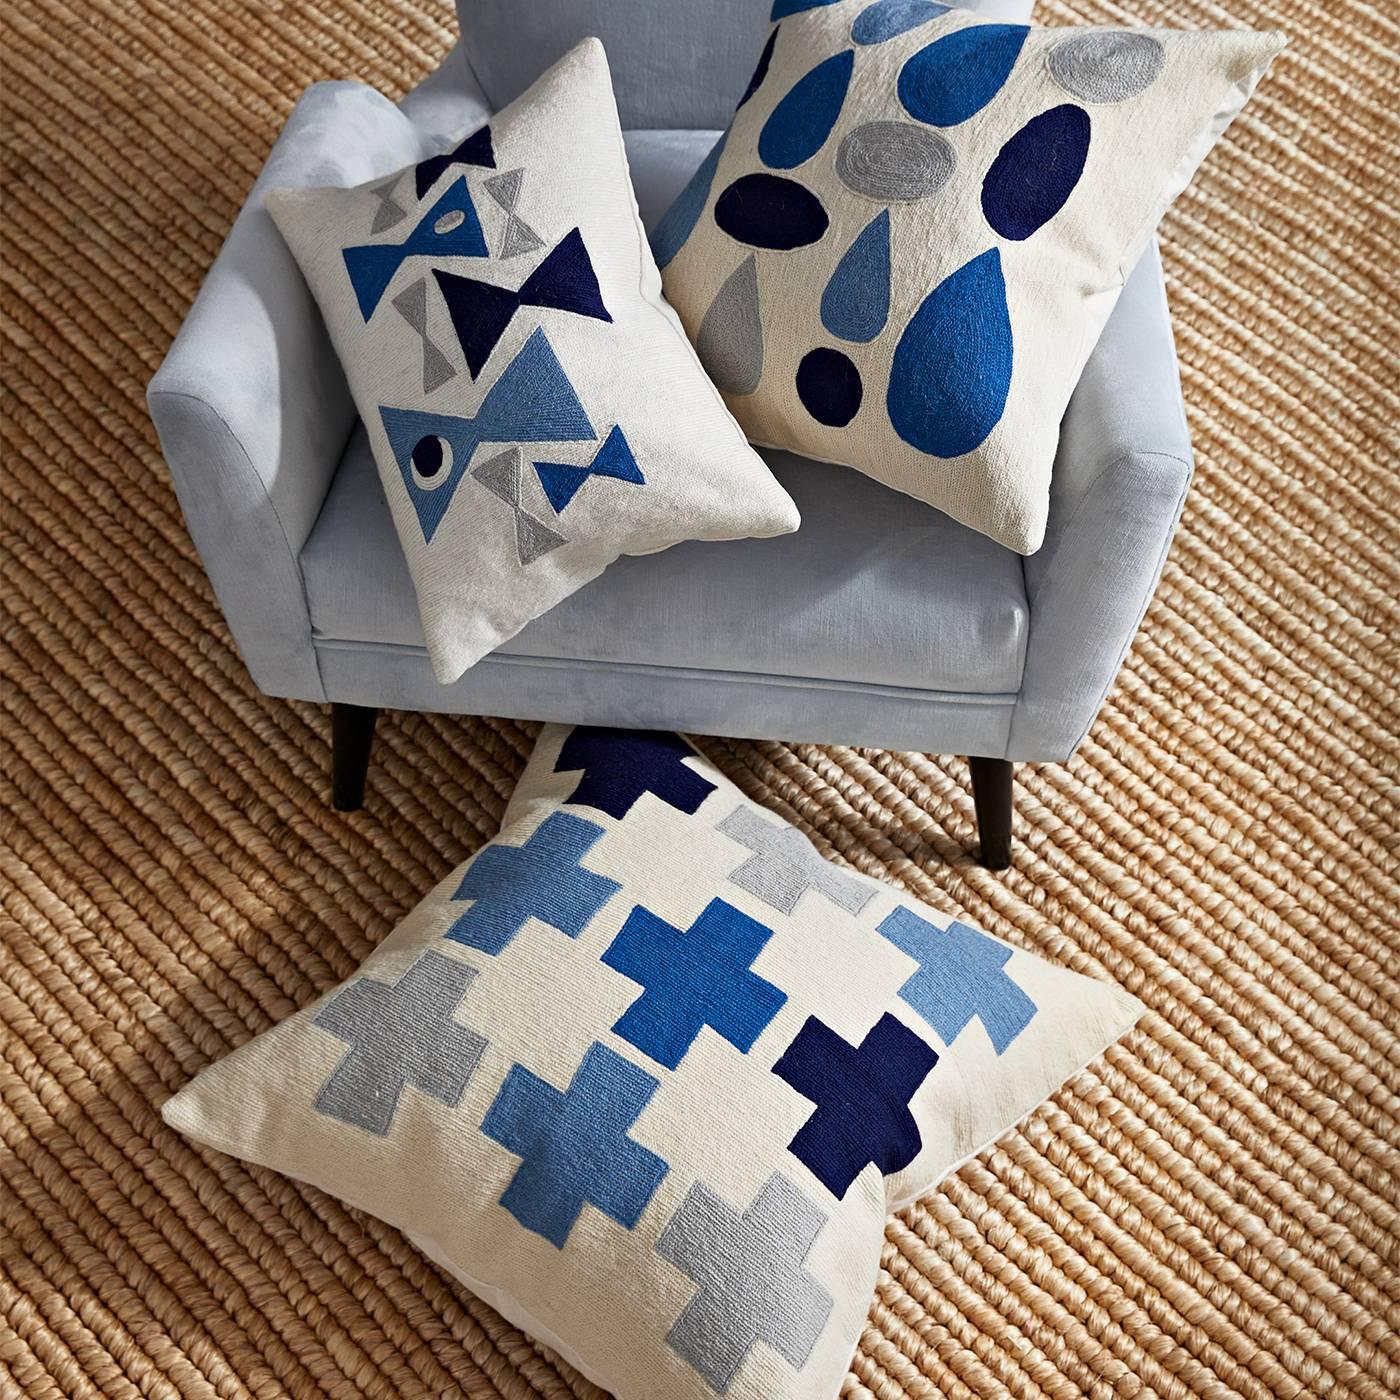 Couture crafts. Hand-stitched by artisans in Kashmir, our Geo chain stitch pillows balance rigorous craftsmanship with chic graphics. Each one is hand-embroidered in wool using a needlepoint chain-stitch technique. Mid-Century Modern patterns meet